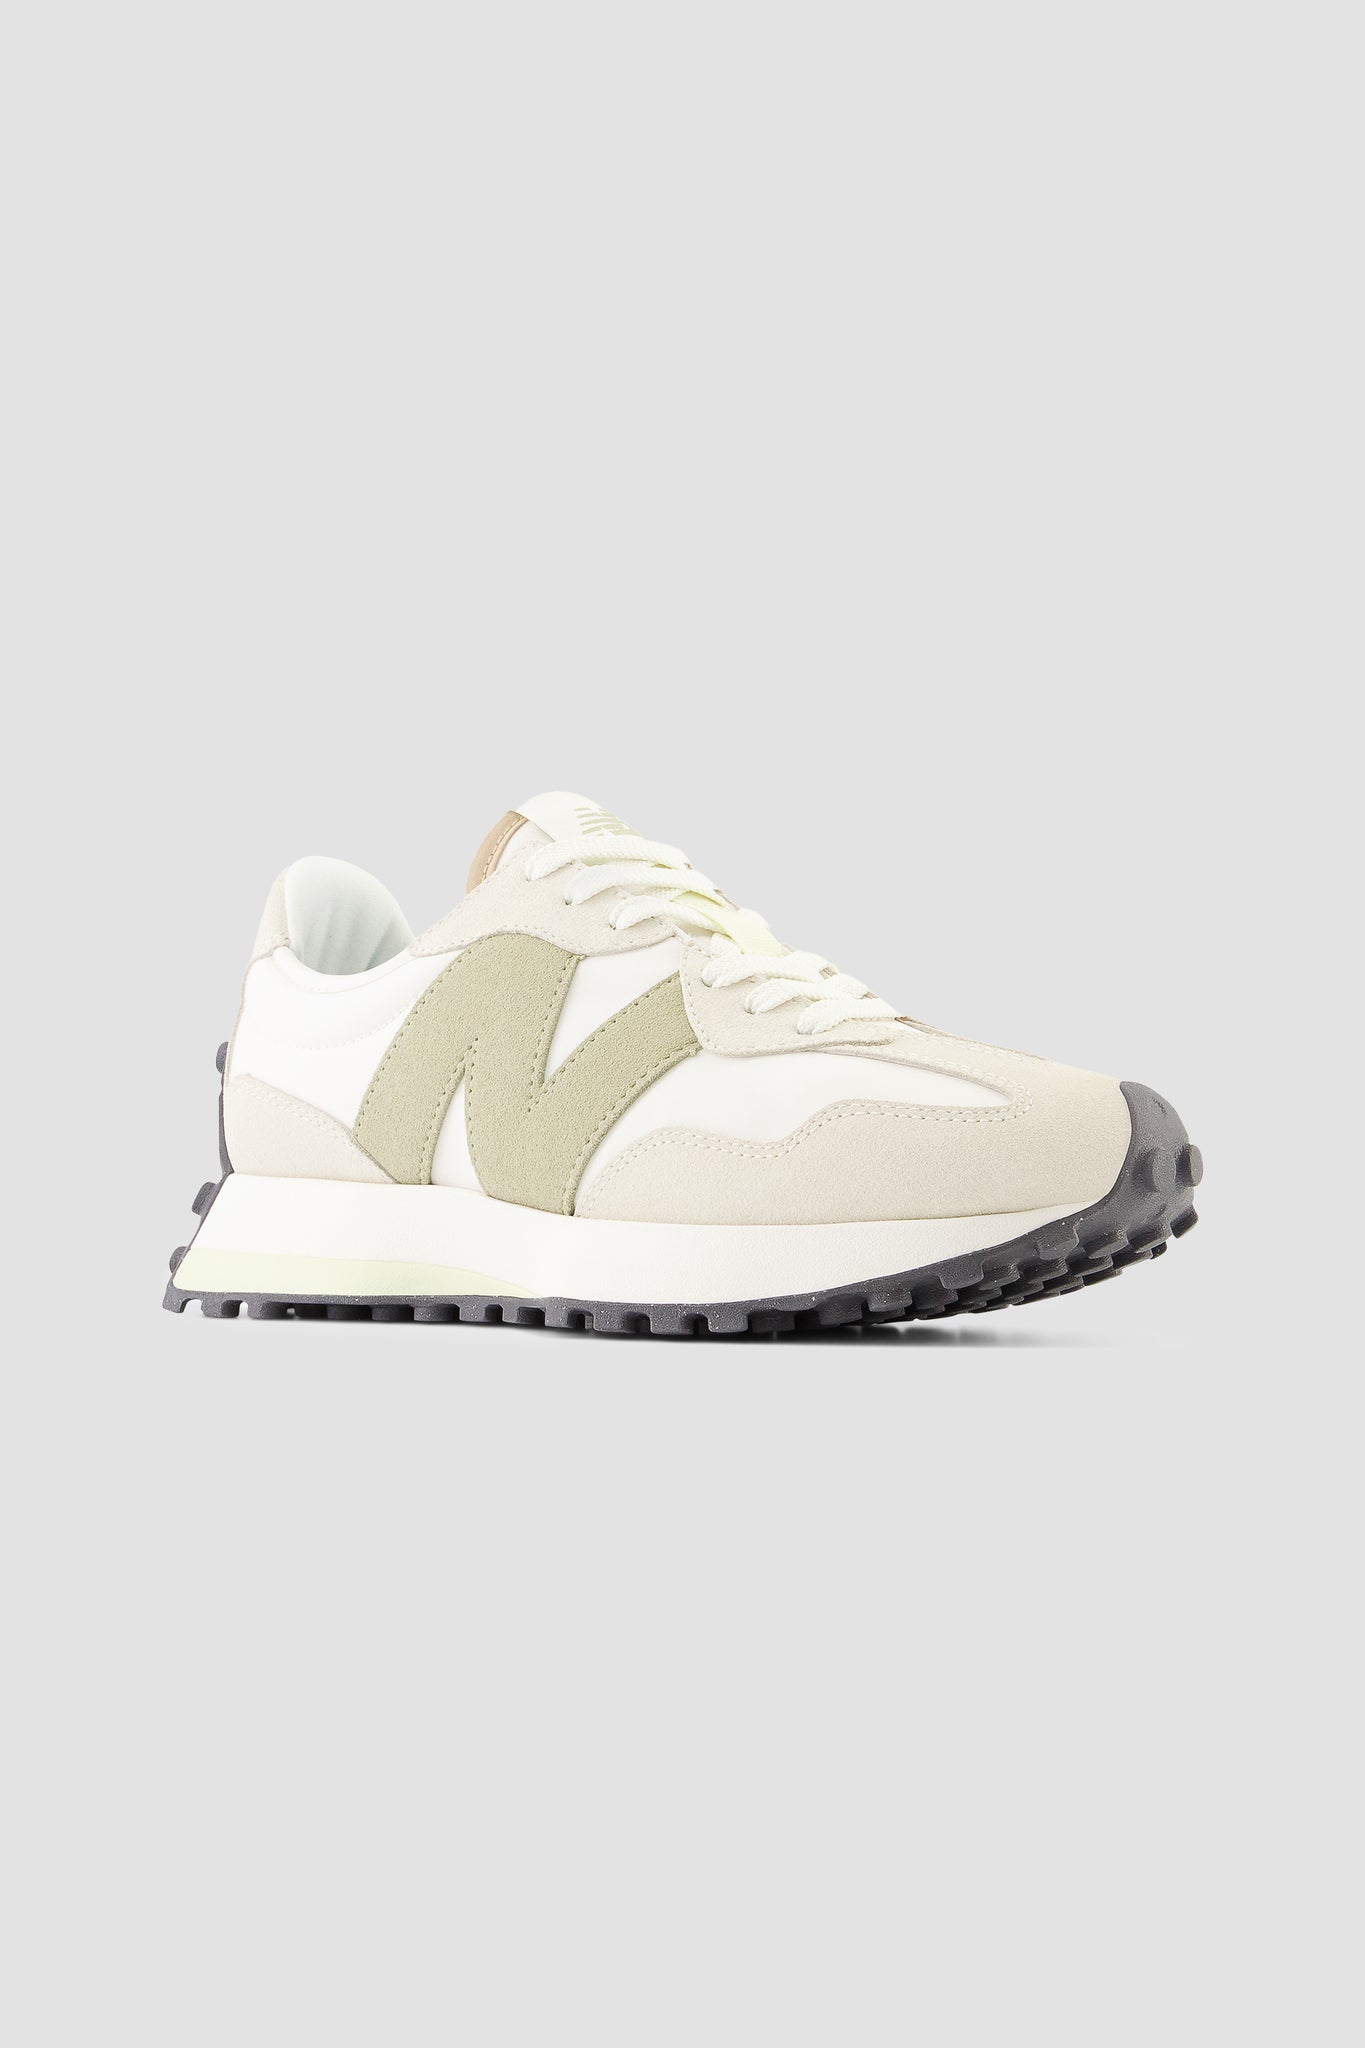 New Balance Women's 327 Sneaker in Turtledove with fatigue green